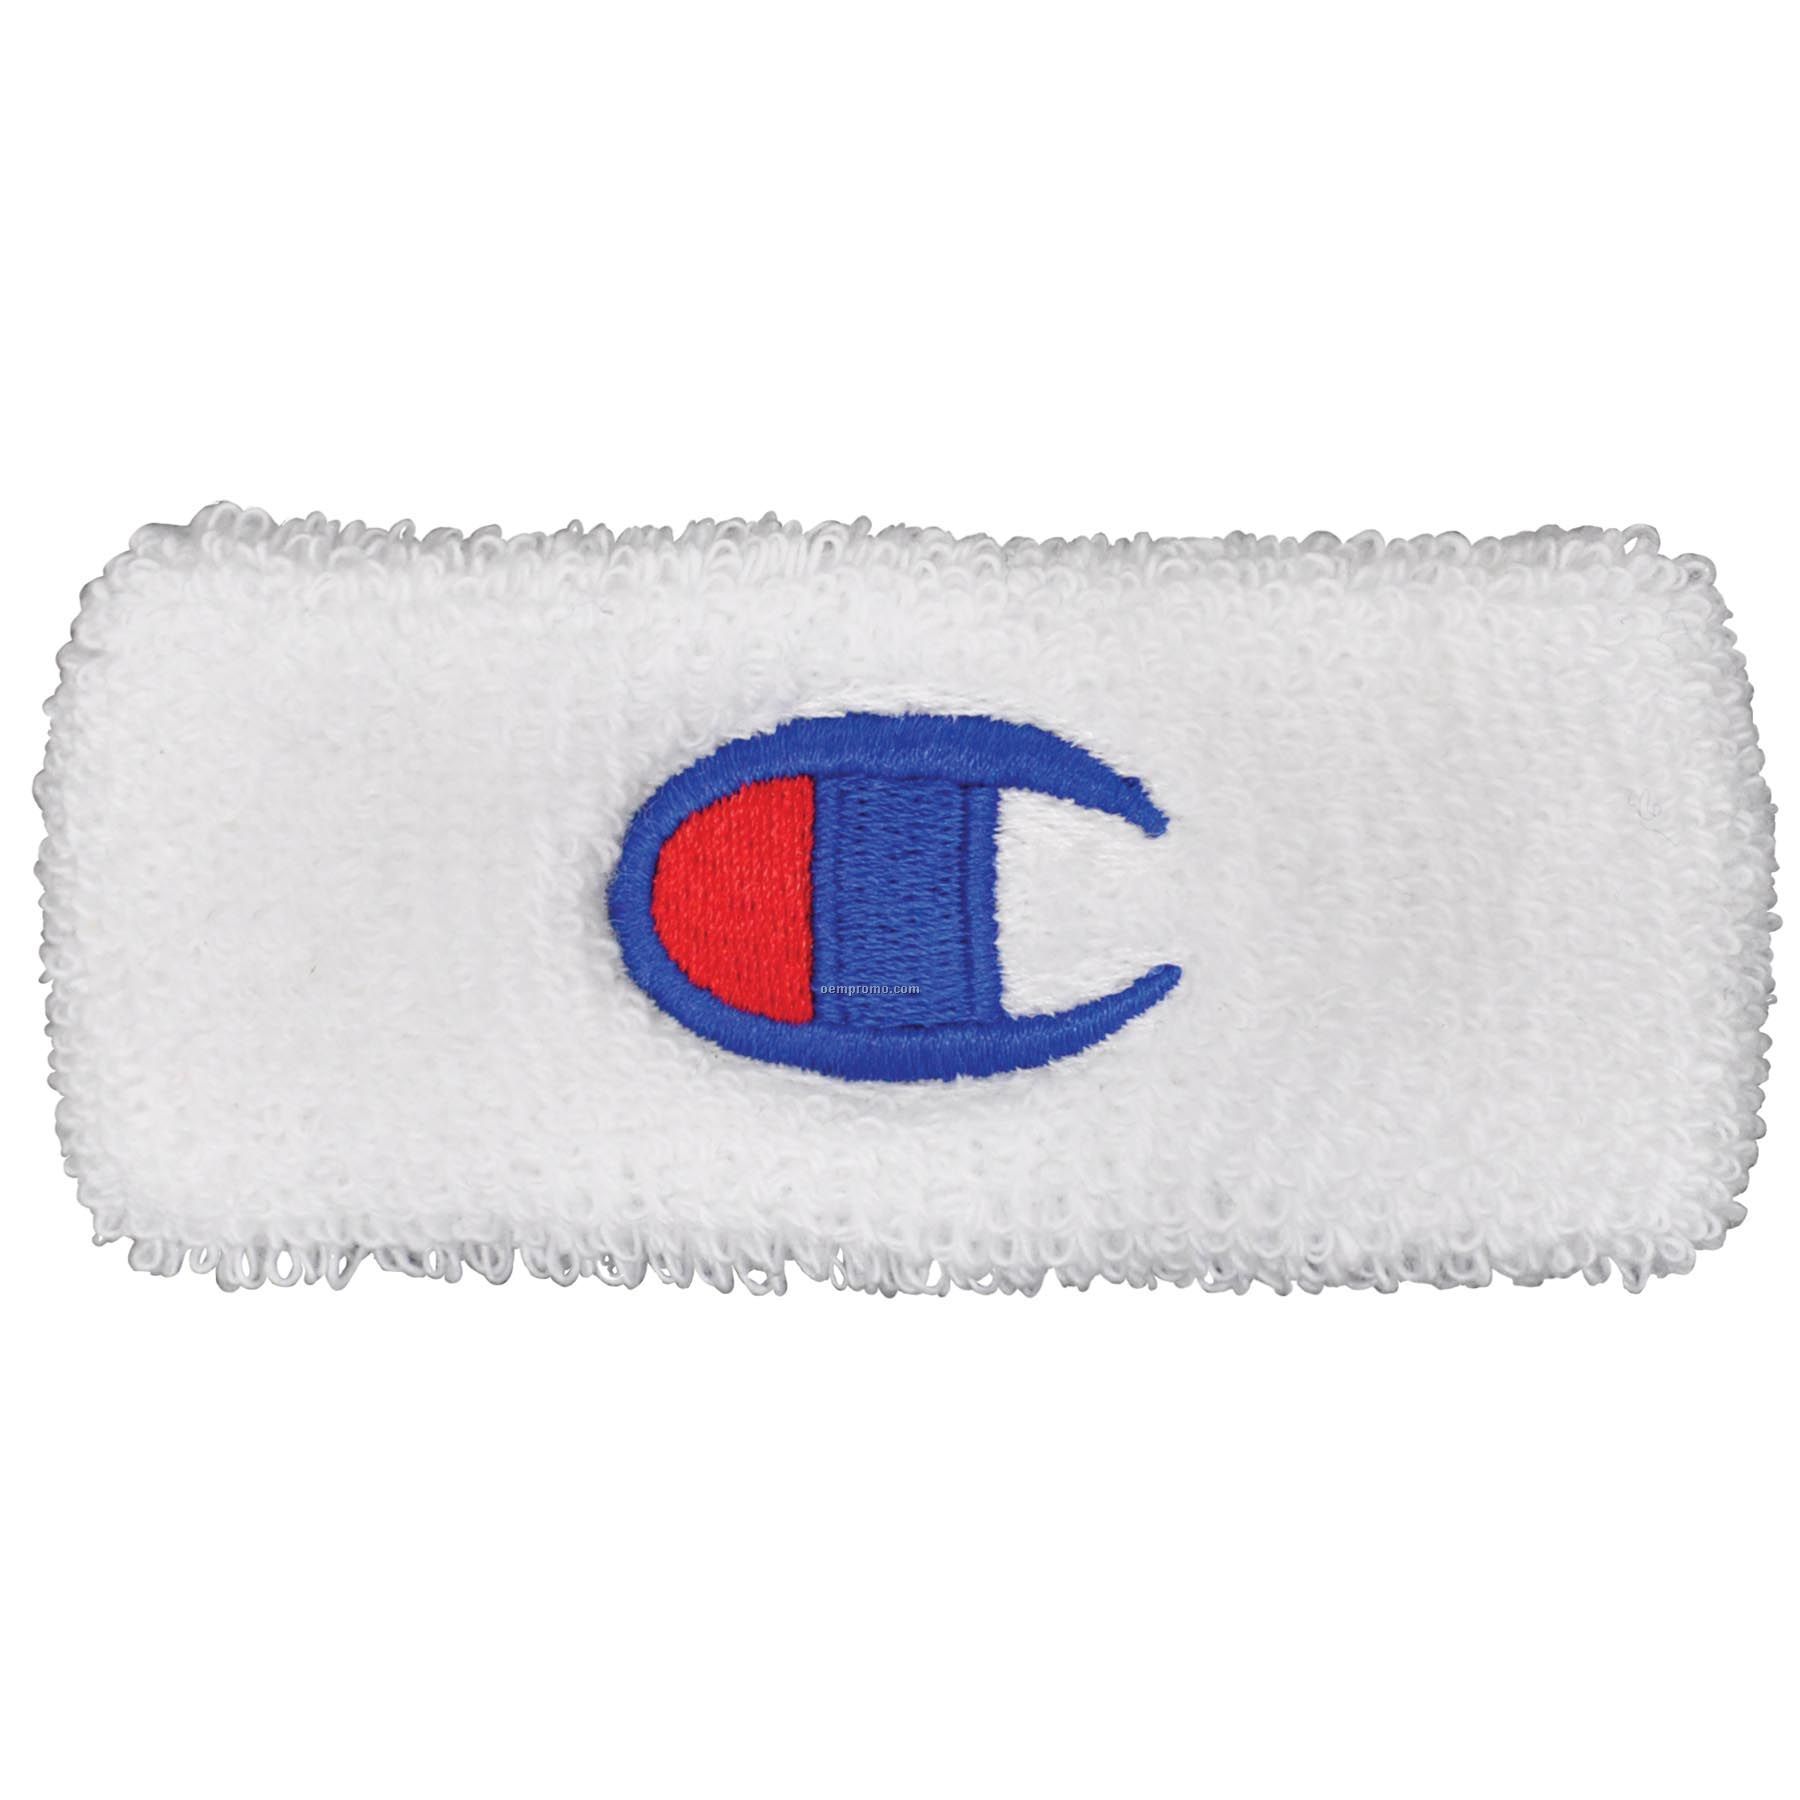 Heavyweight Cotton Bicep Armband With Direct Embroidery